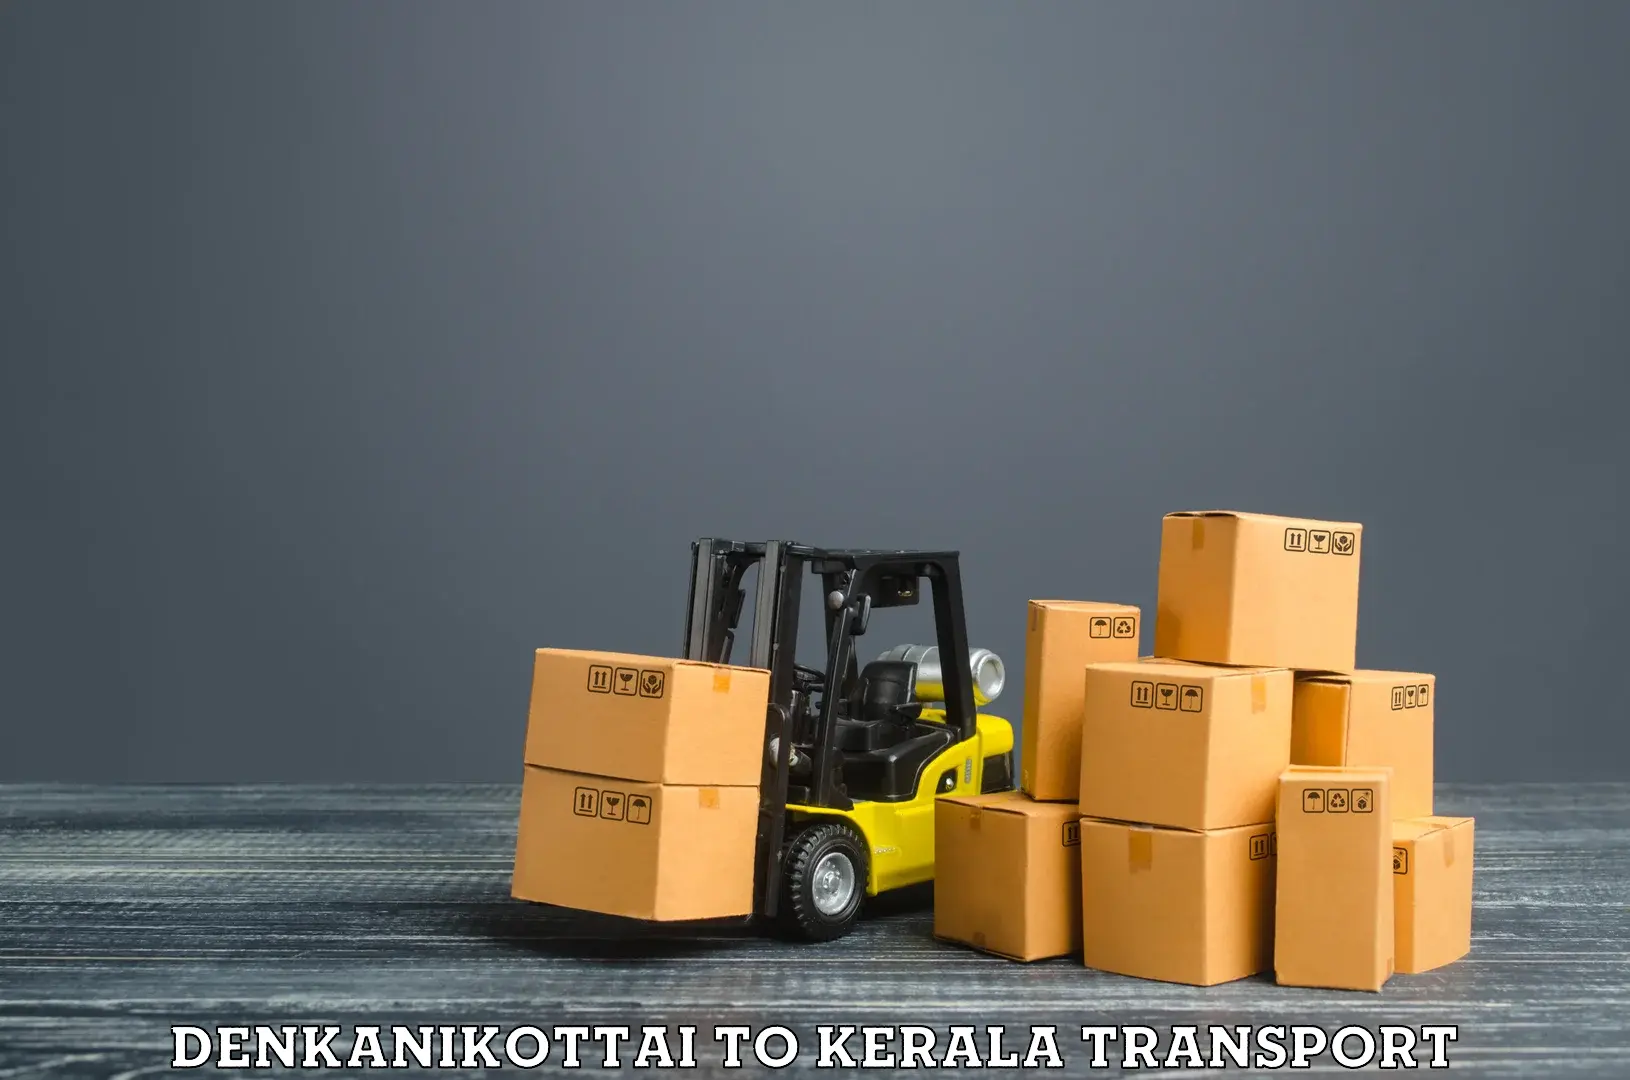 Commercial transport service Denkanikottai to Cochin University of Science and Technology